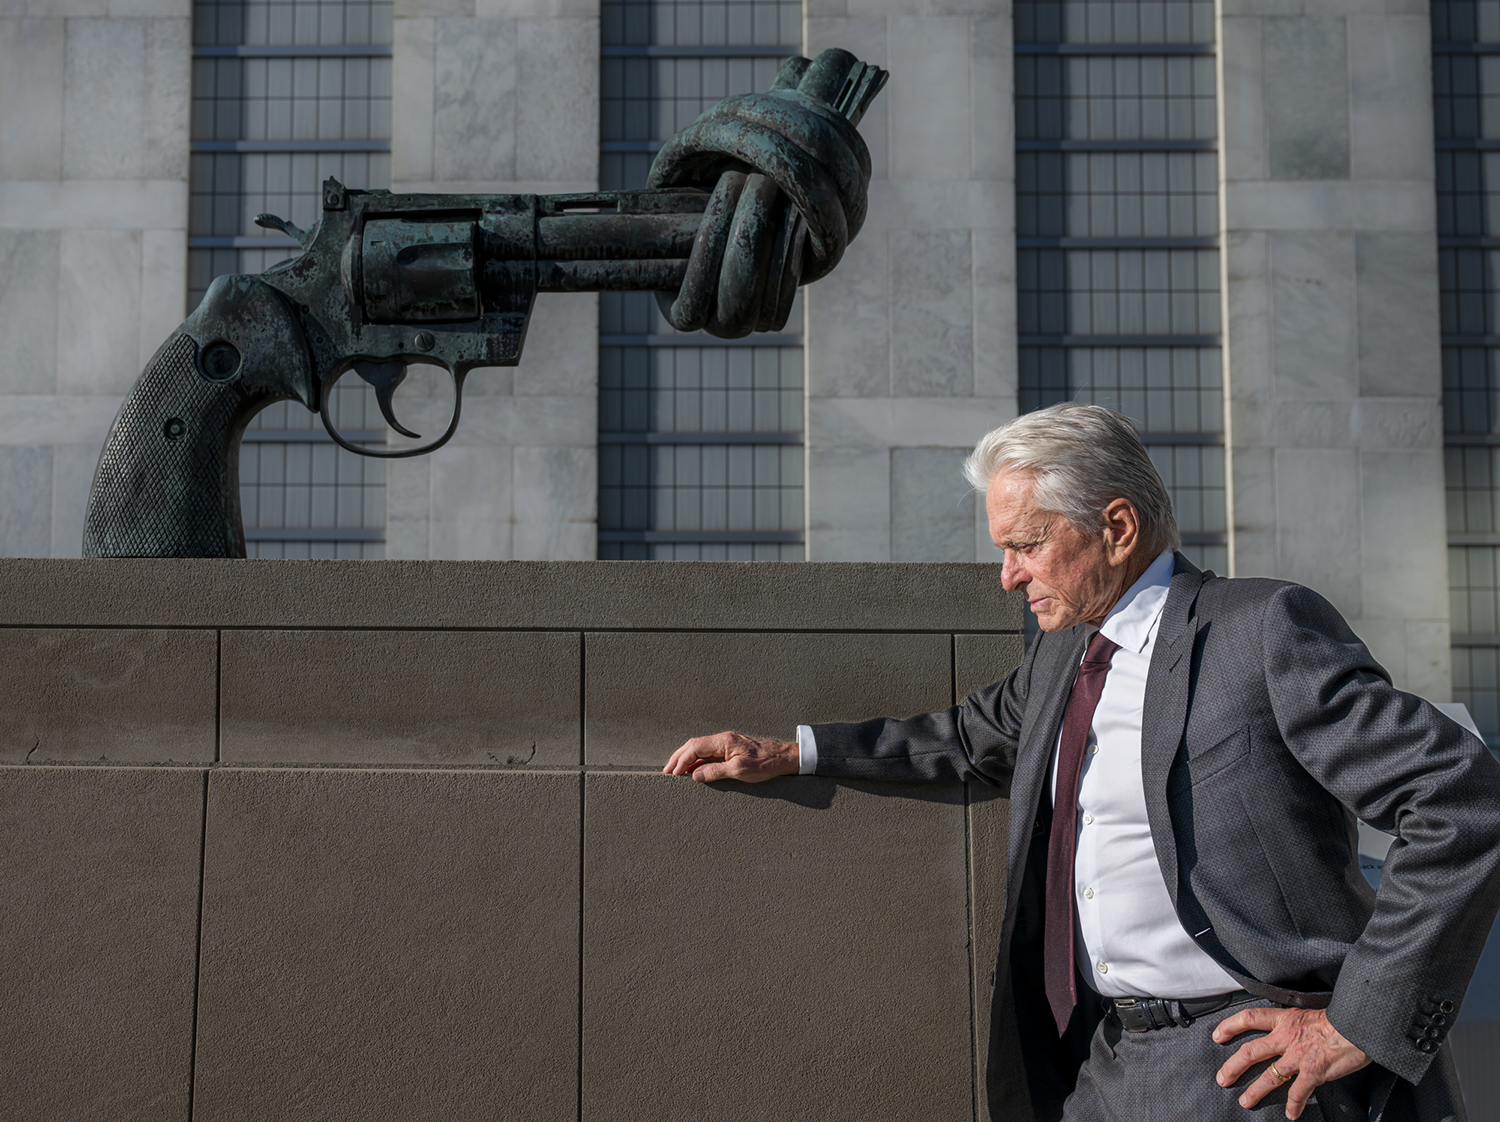 Michael Douglas, 51Թ Messenger of Peace, stops by the “Non-Violence” sculpture during his visit to UN Headquarters to attend the International Day of Peace Youth Observance. 